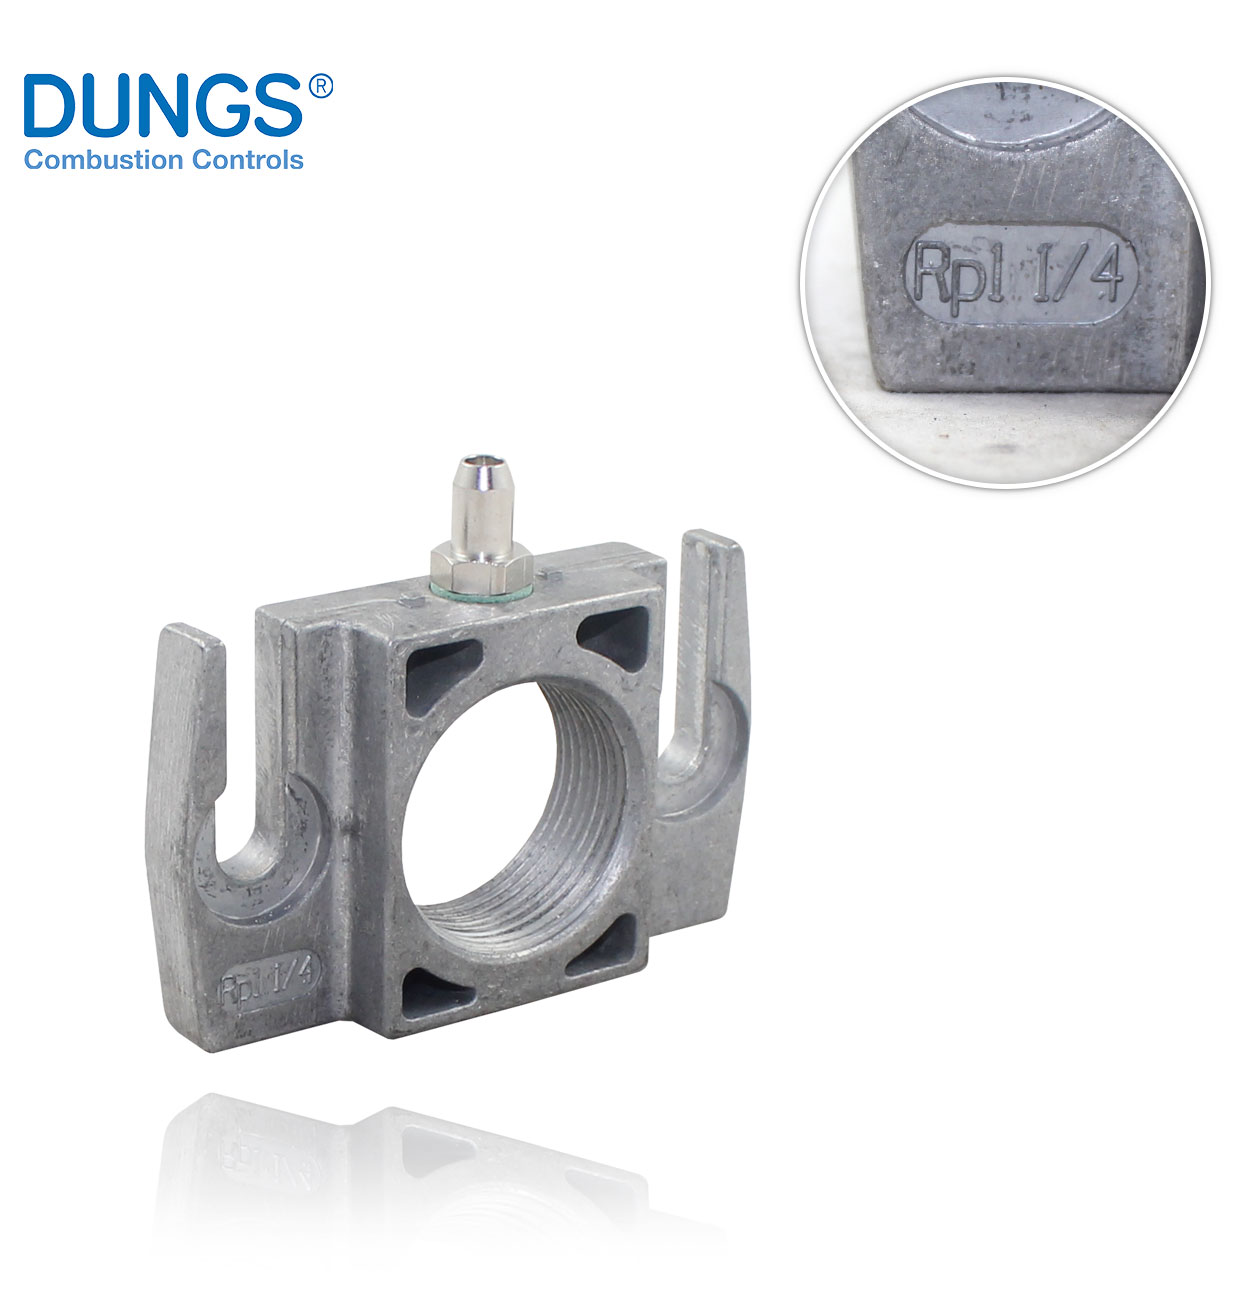 R1"1/4 DUNGS FLANGE WITH NOZZLES FOR MB410/412